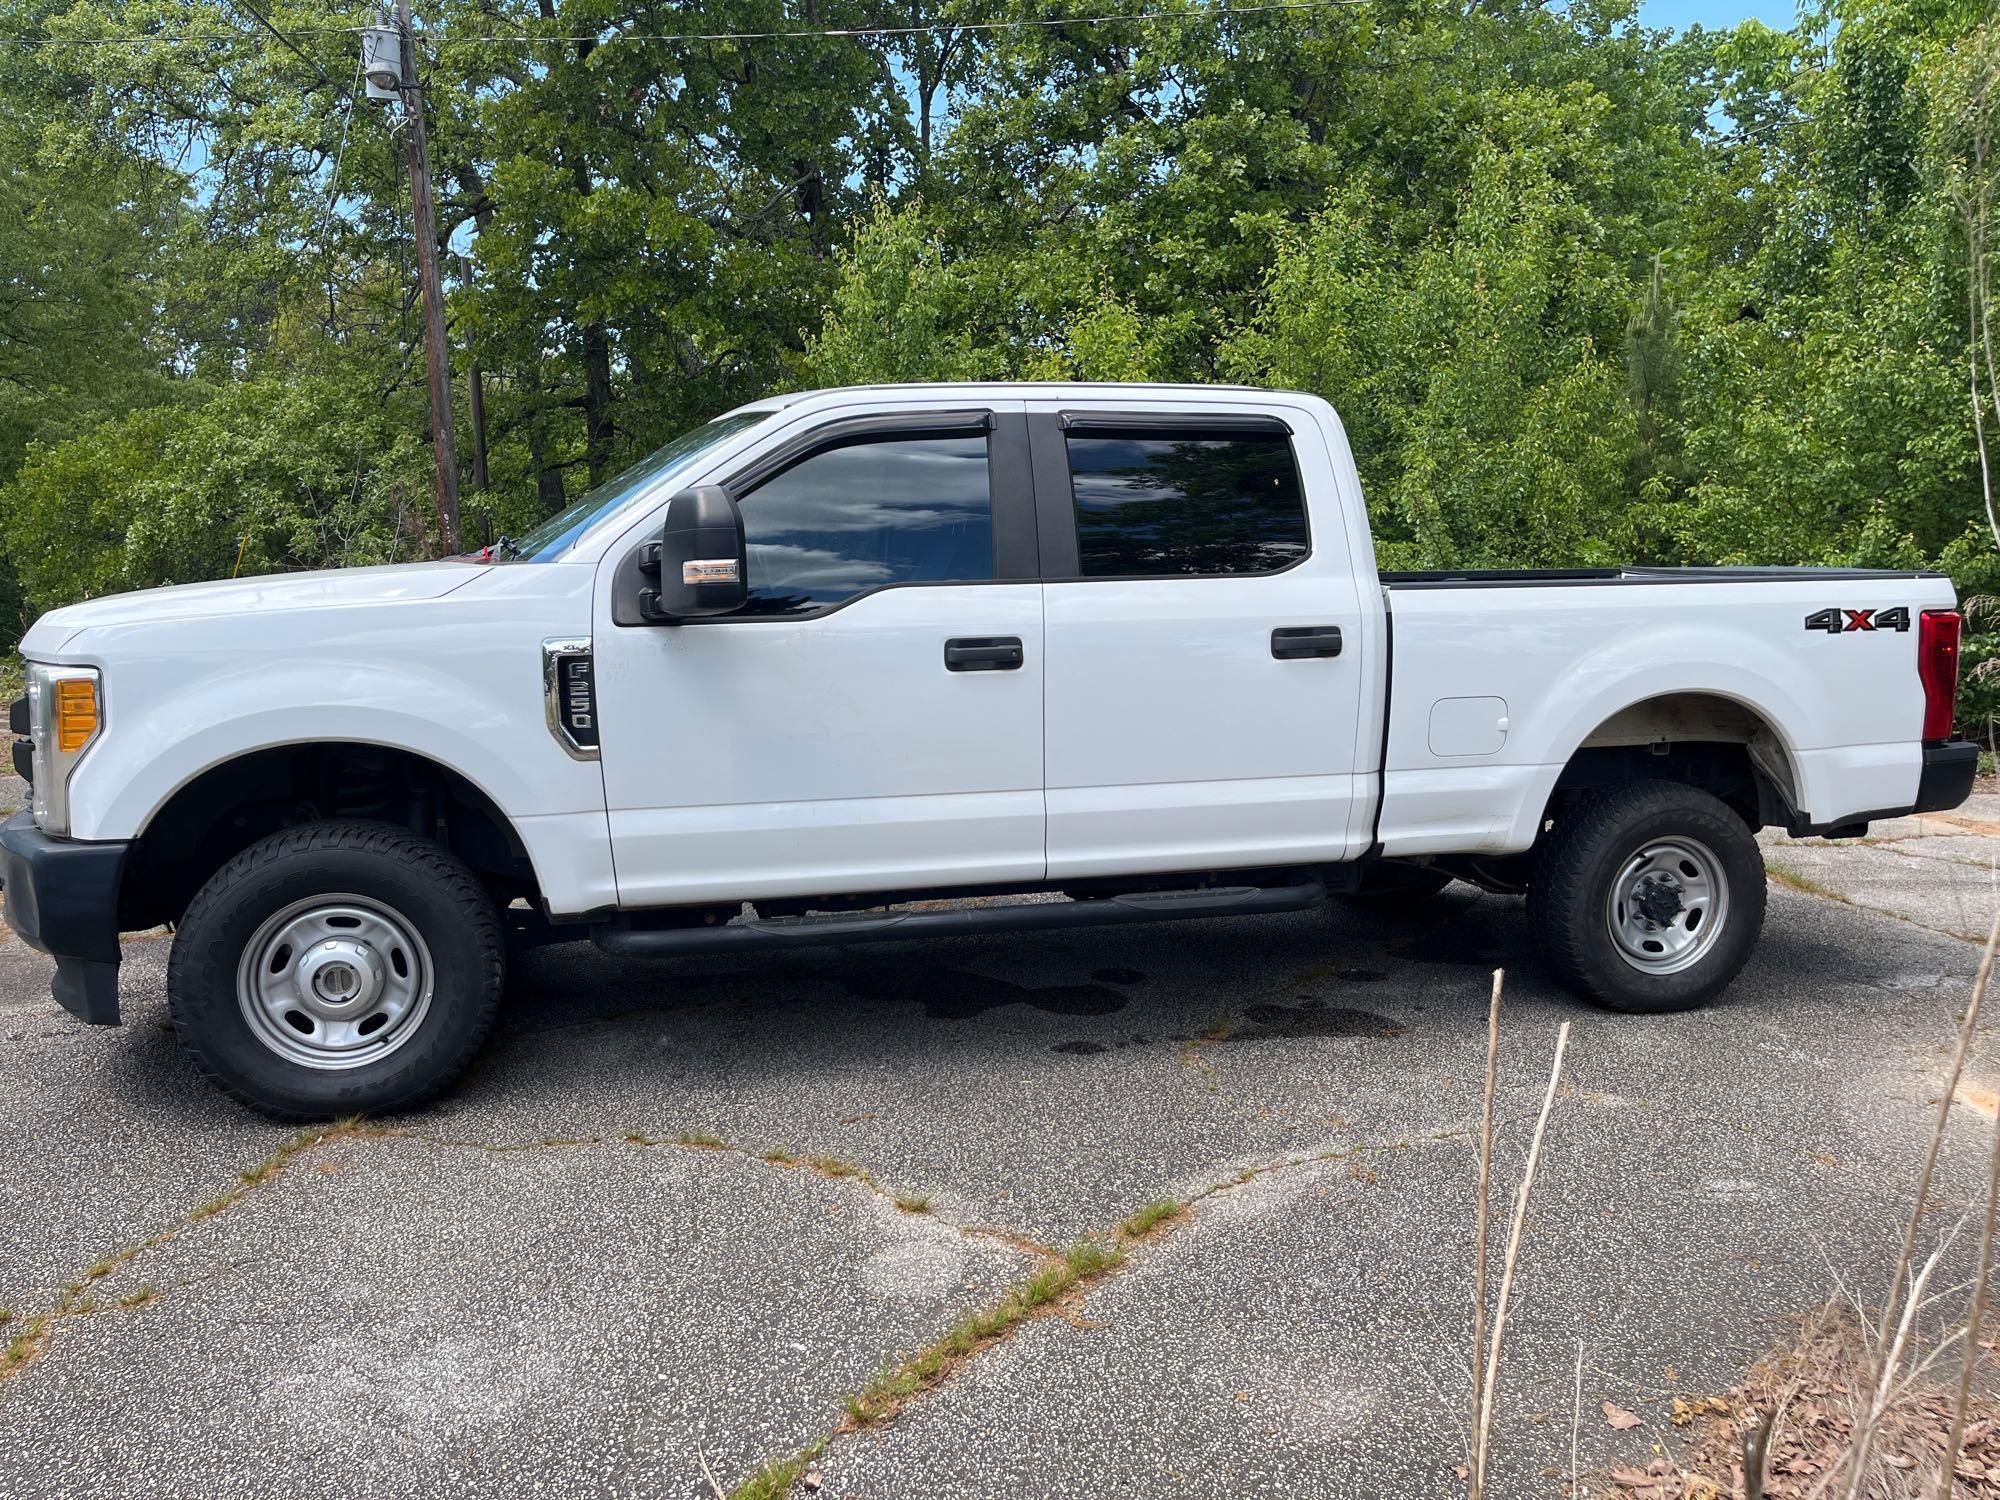 2017 Ford F-250 Pickup Truck, VIN # 1FT7W2B65HED69686